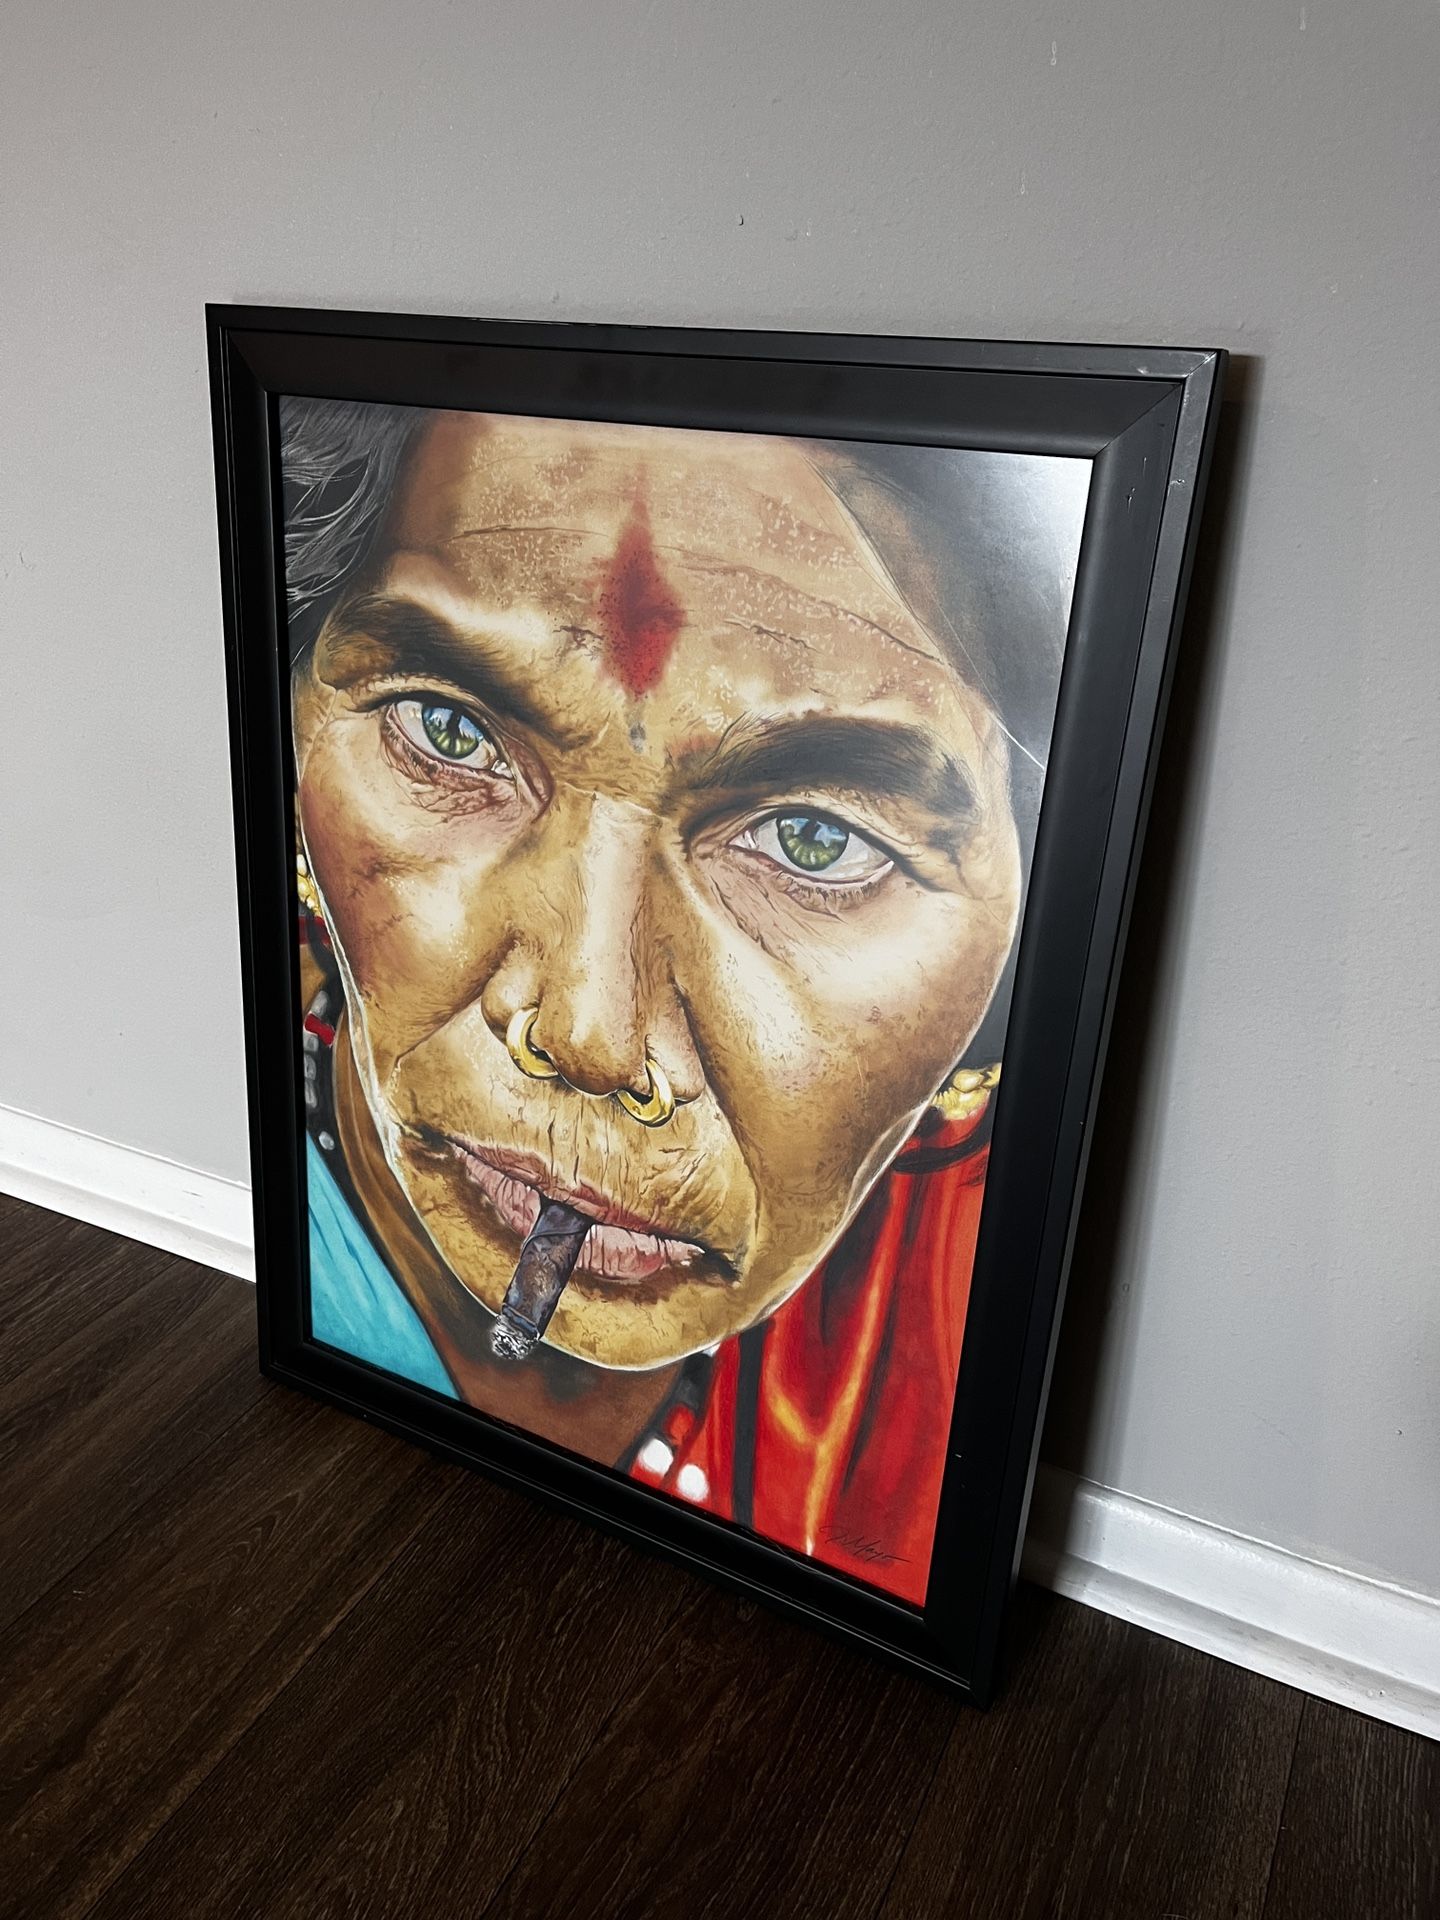 Indian Woman Private Artist Colored Pencil Print( Certificate Included) 